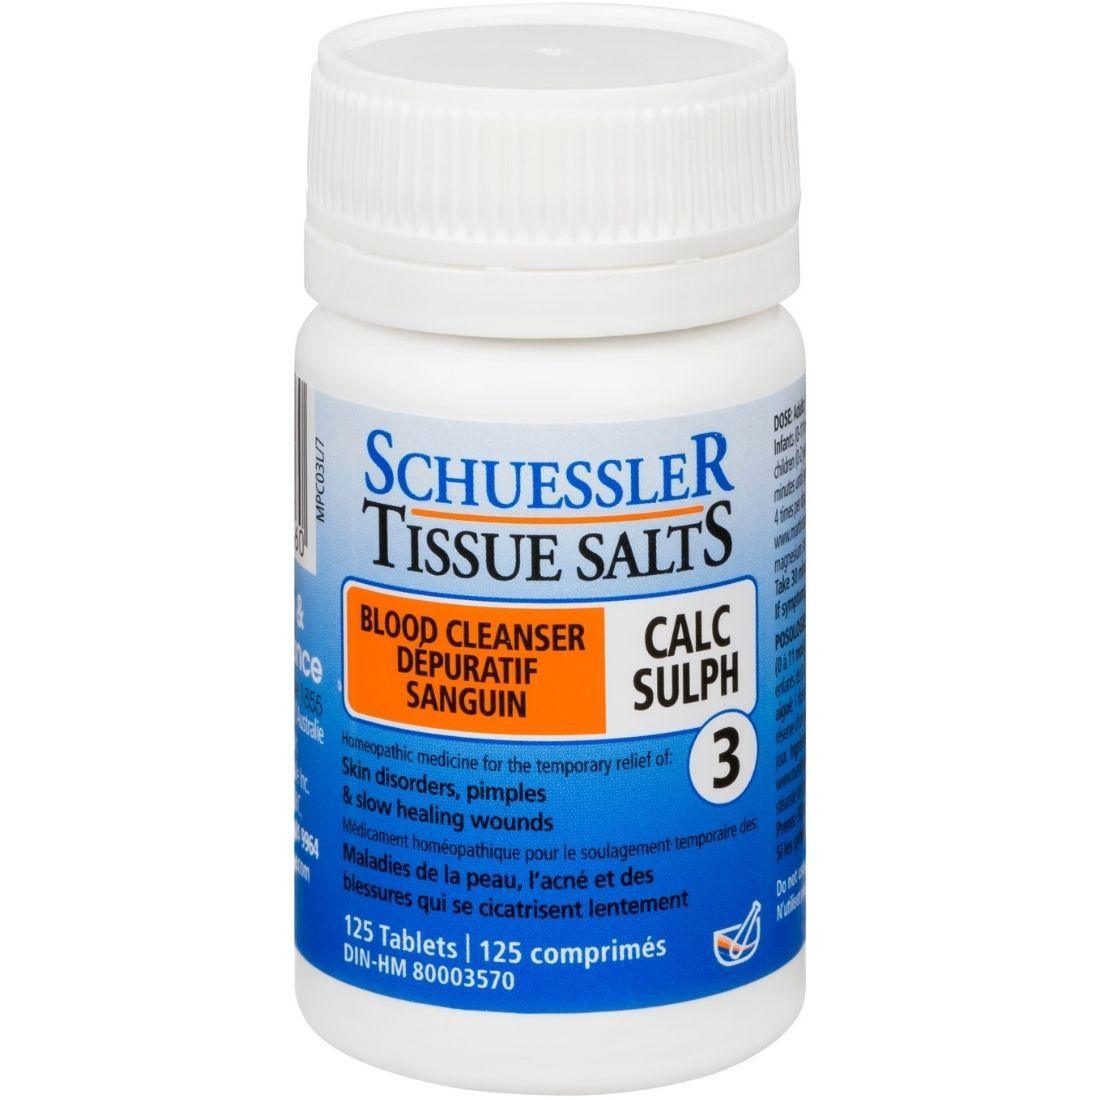 Schuessler Tissue Salts Calc Sulph 6X - 125 Tabs Homeopathic at Village Vitamin Store